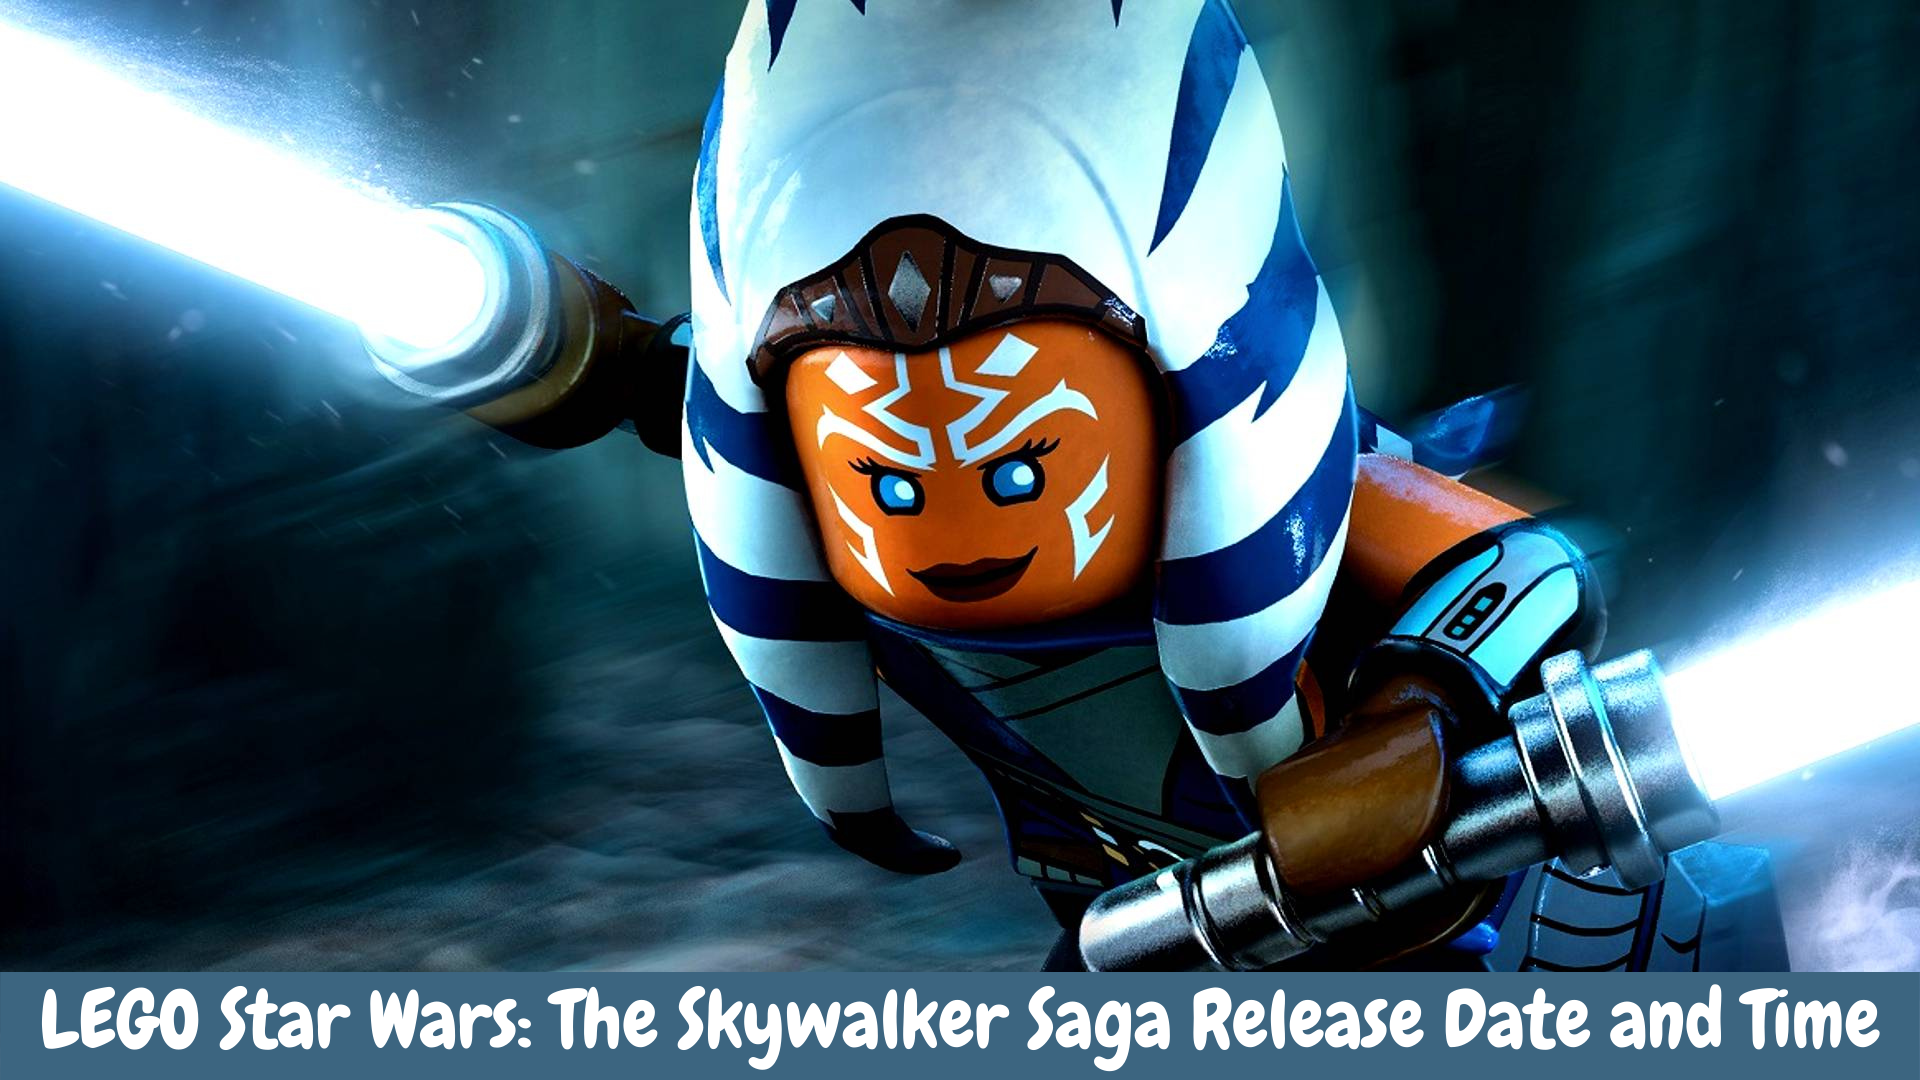 LEGO Star Wars: The Skywalker Saga Release Date and Time